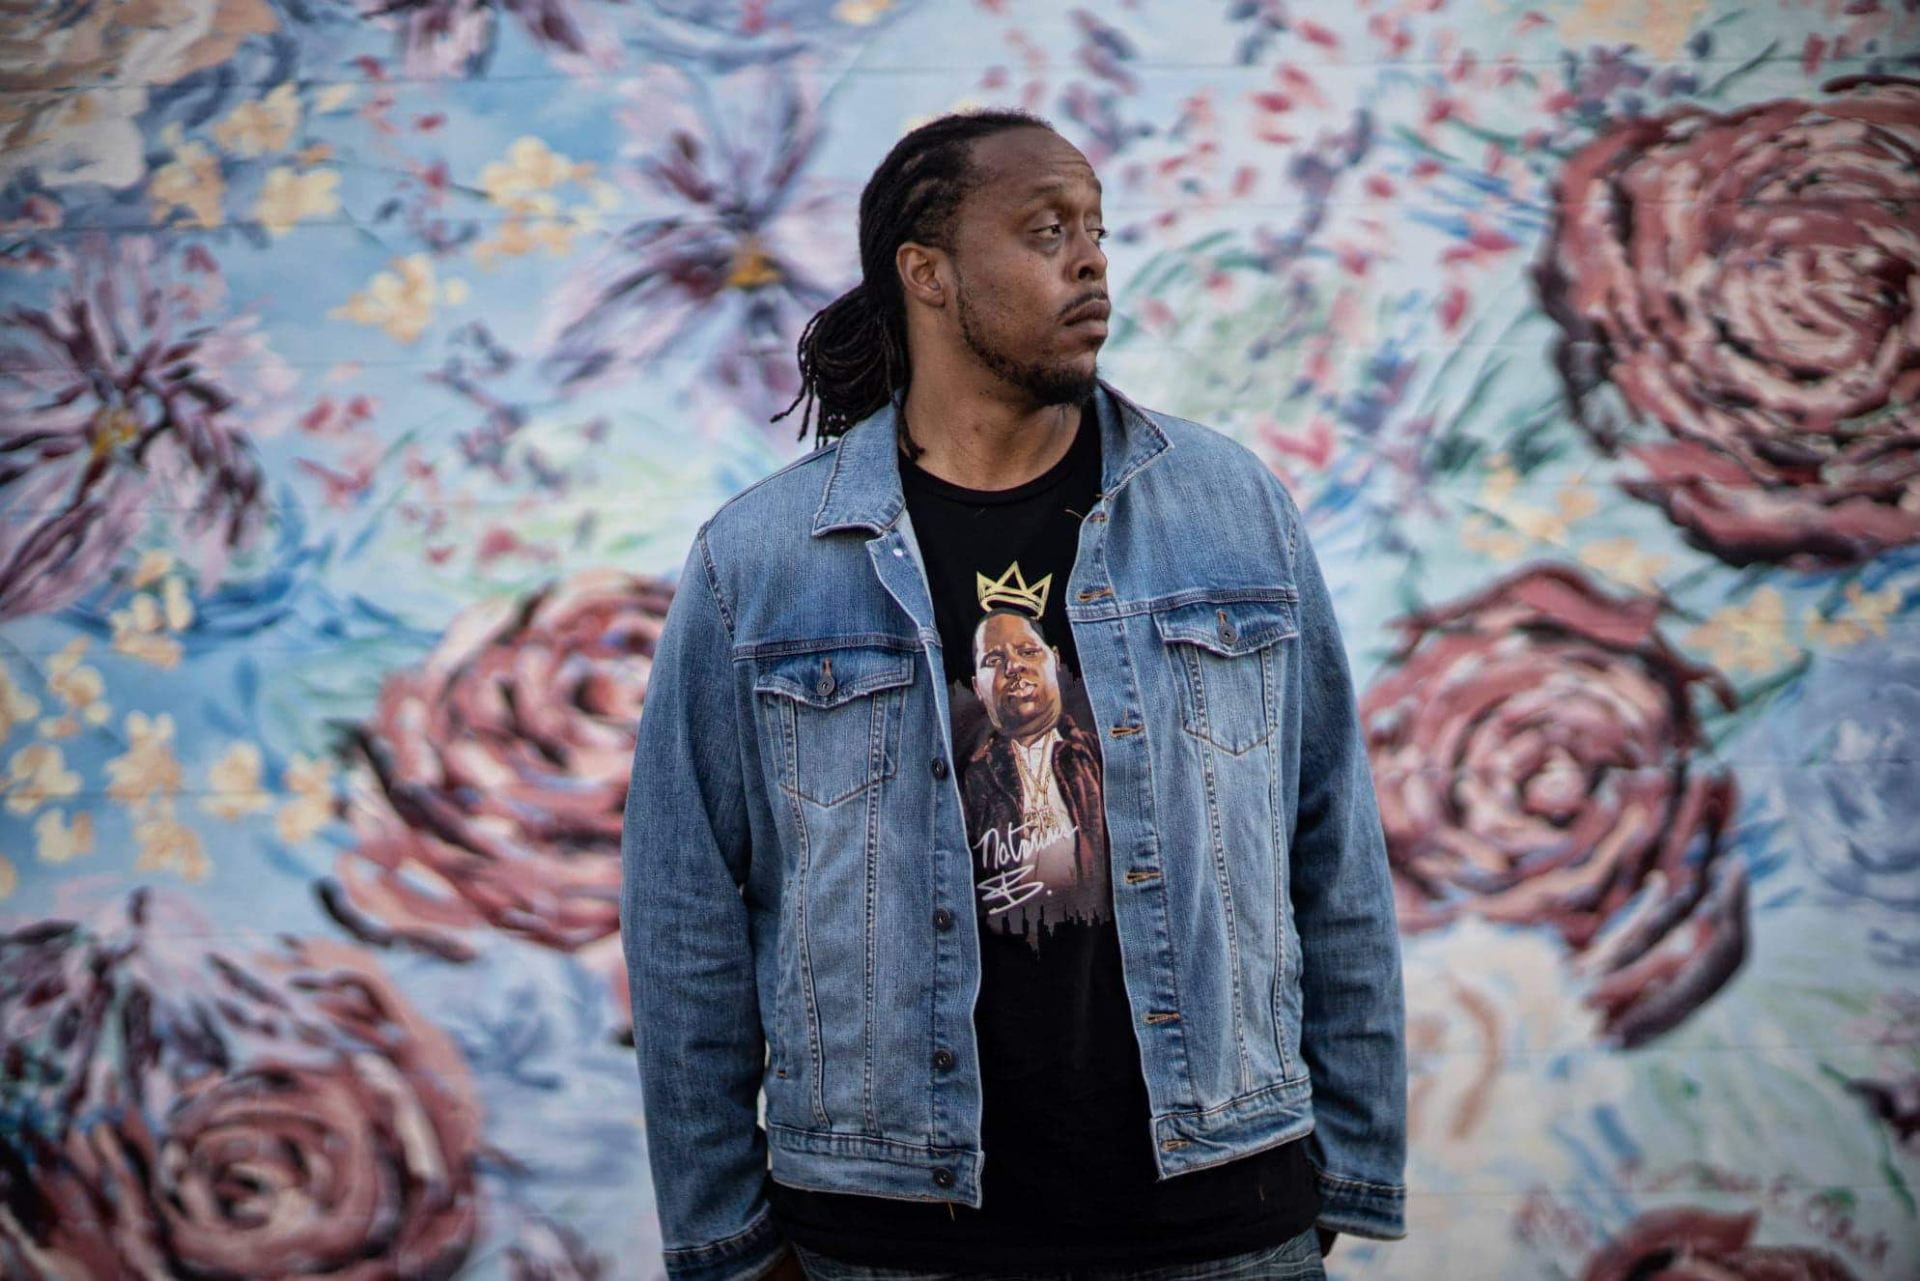 Evan Williams, an African-American man, wearing a blue denim jacket and black shirt featuring a portrait of The Notorious B.I.G. He is wearing his dreadlocks tied back and is looking to his left. Behind him is a colourful mural of various kinds of flowers.